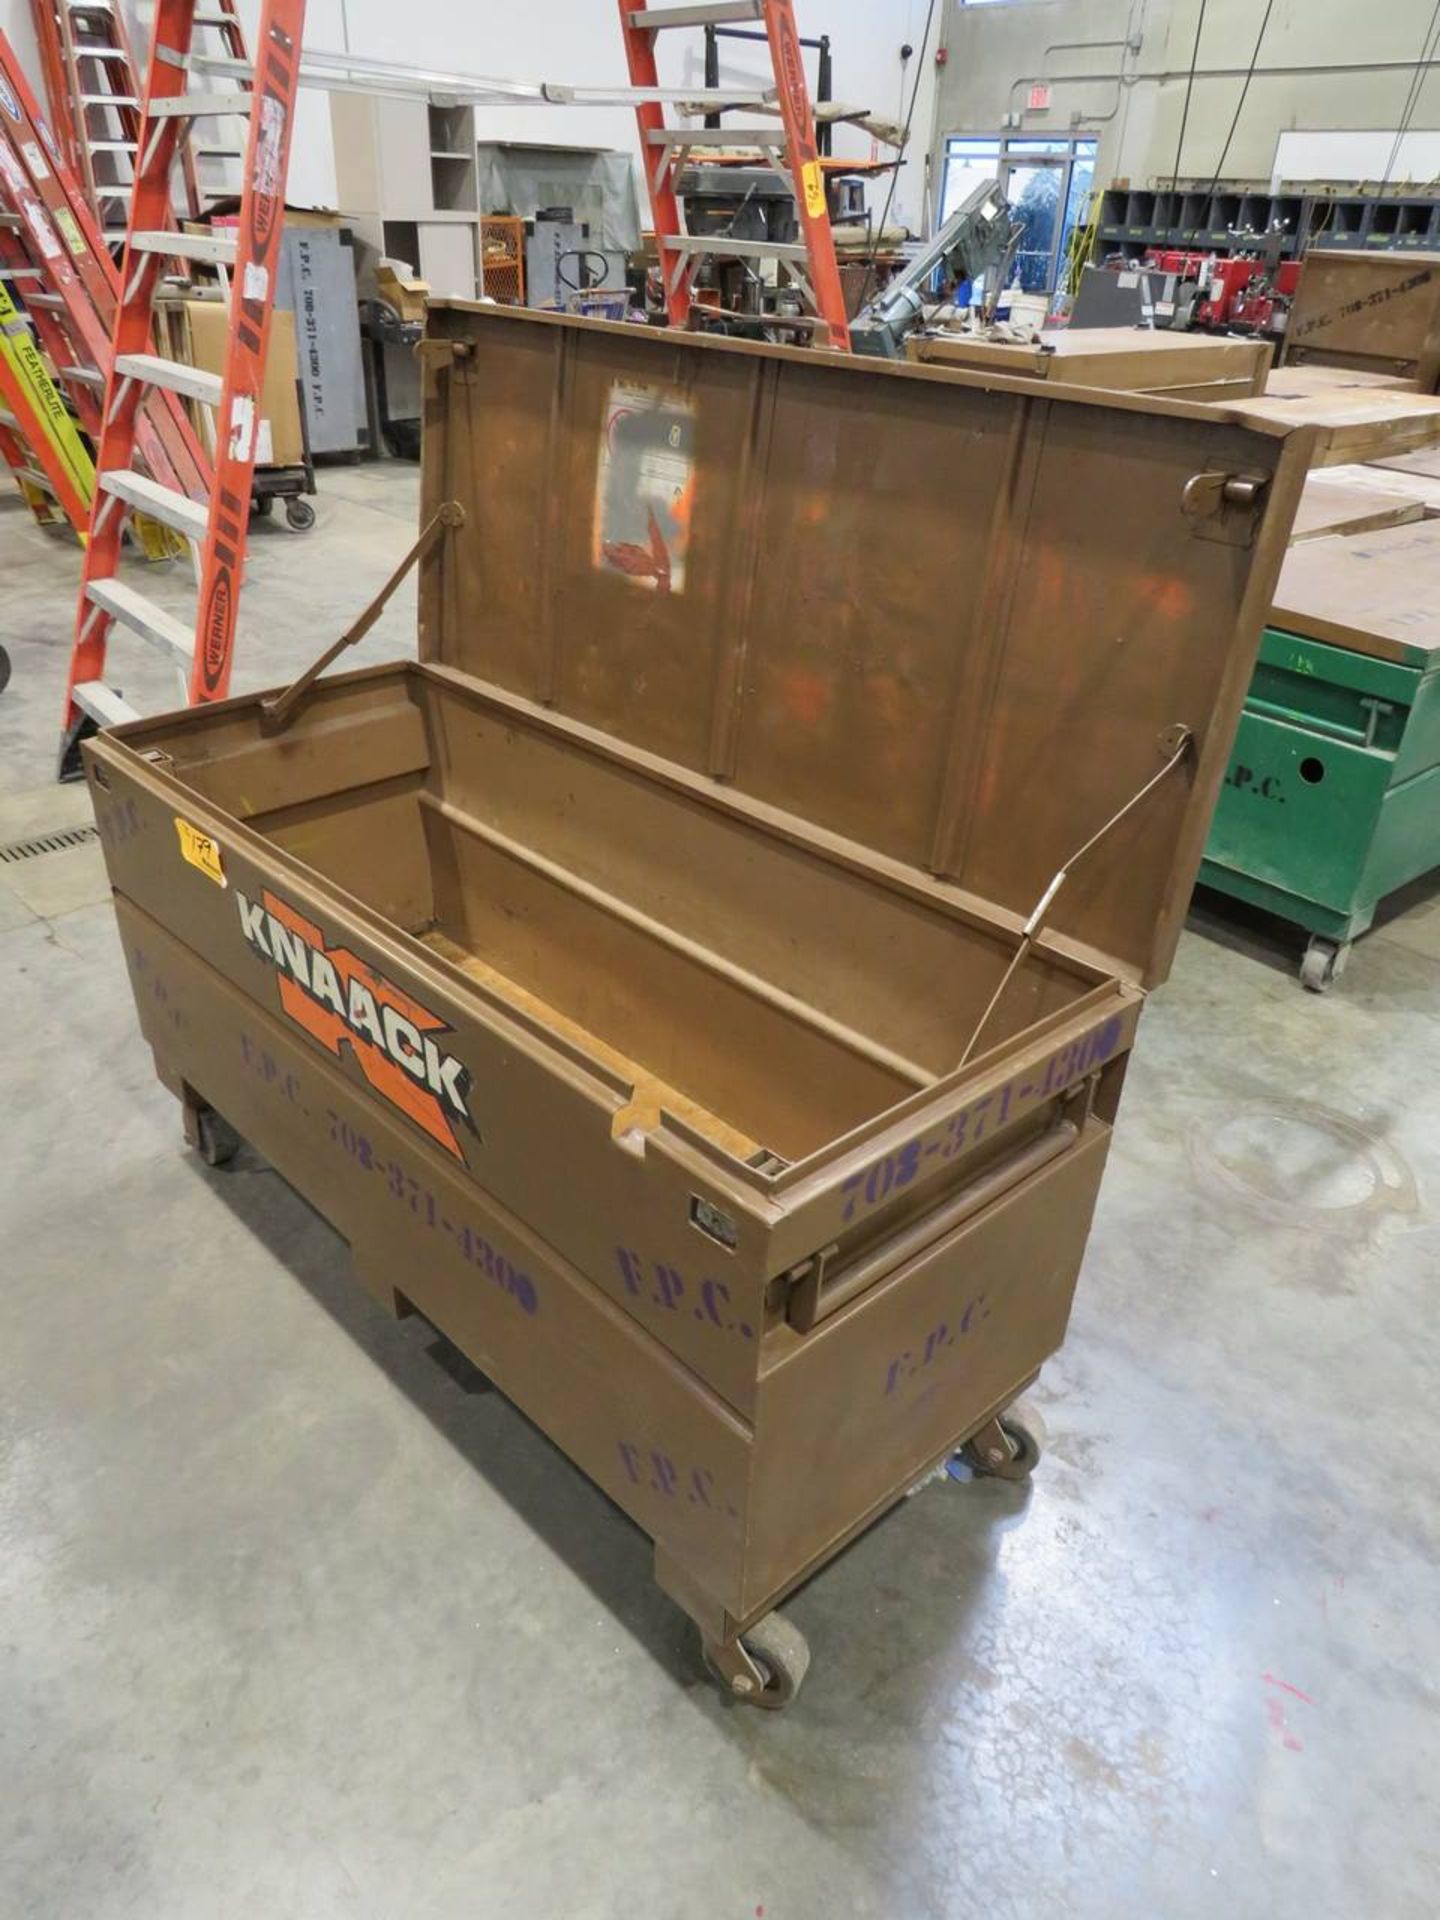 Knaack 20.25 Cu. Ft. - Approx. 60" W x 24" D x 35" H Storage Chest - Image 7 of 7